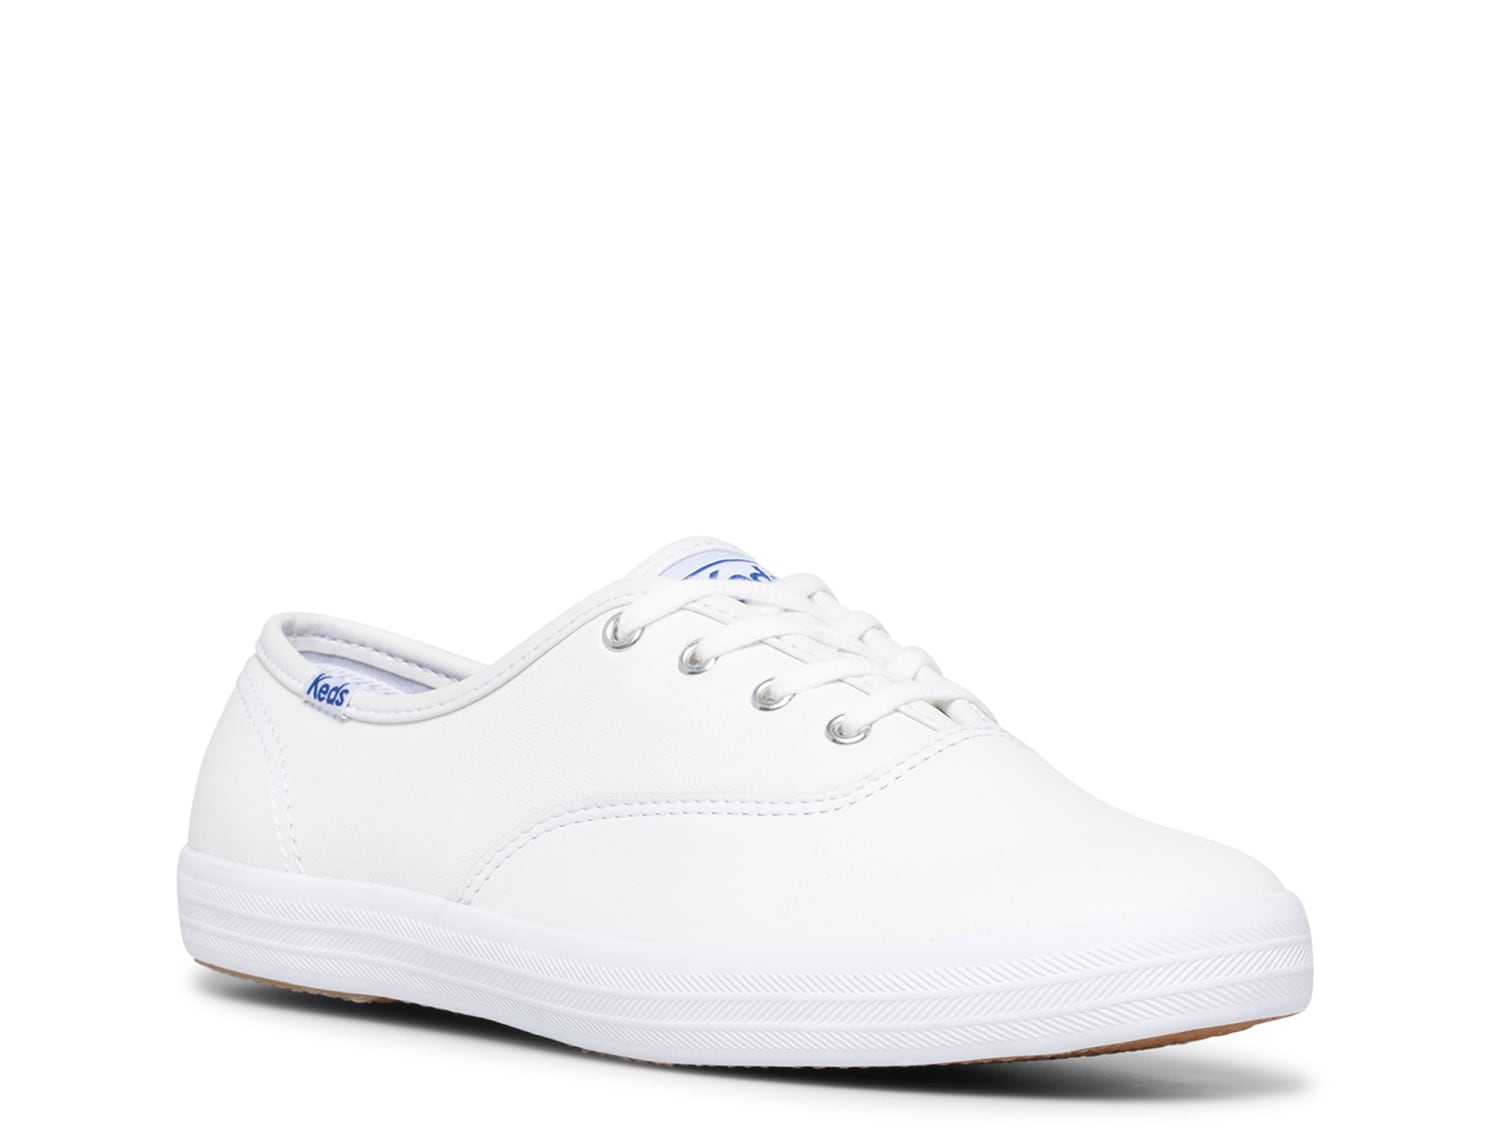 Keds Champion Leather Sneaker - Women's - Free Shipping | DSW